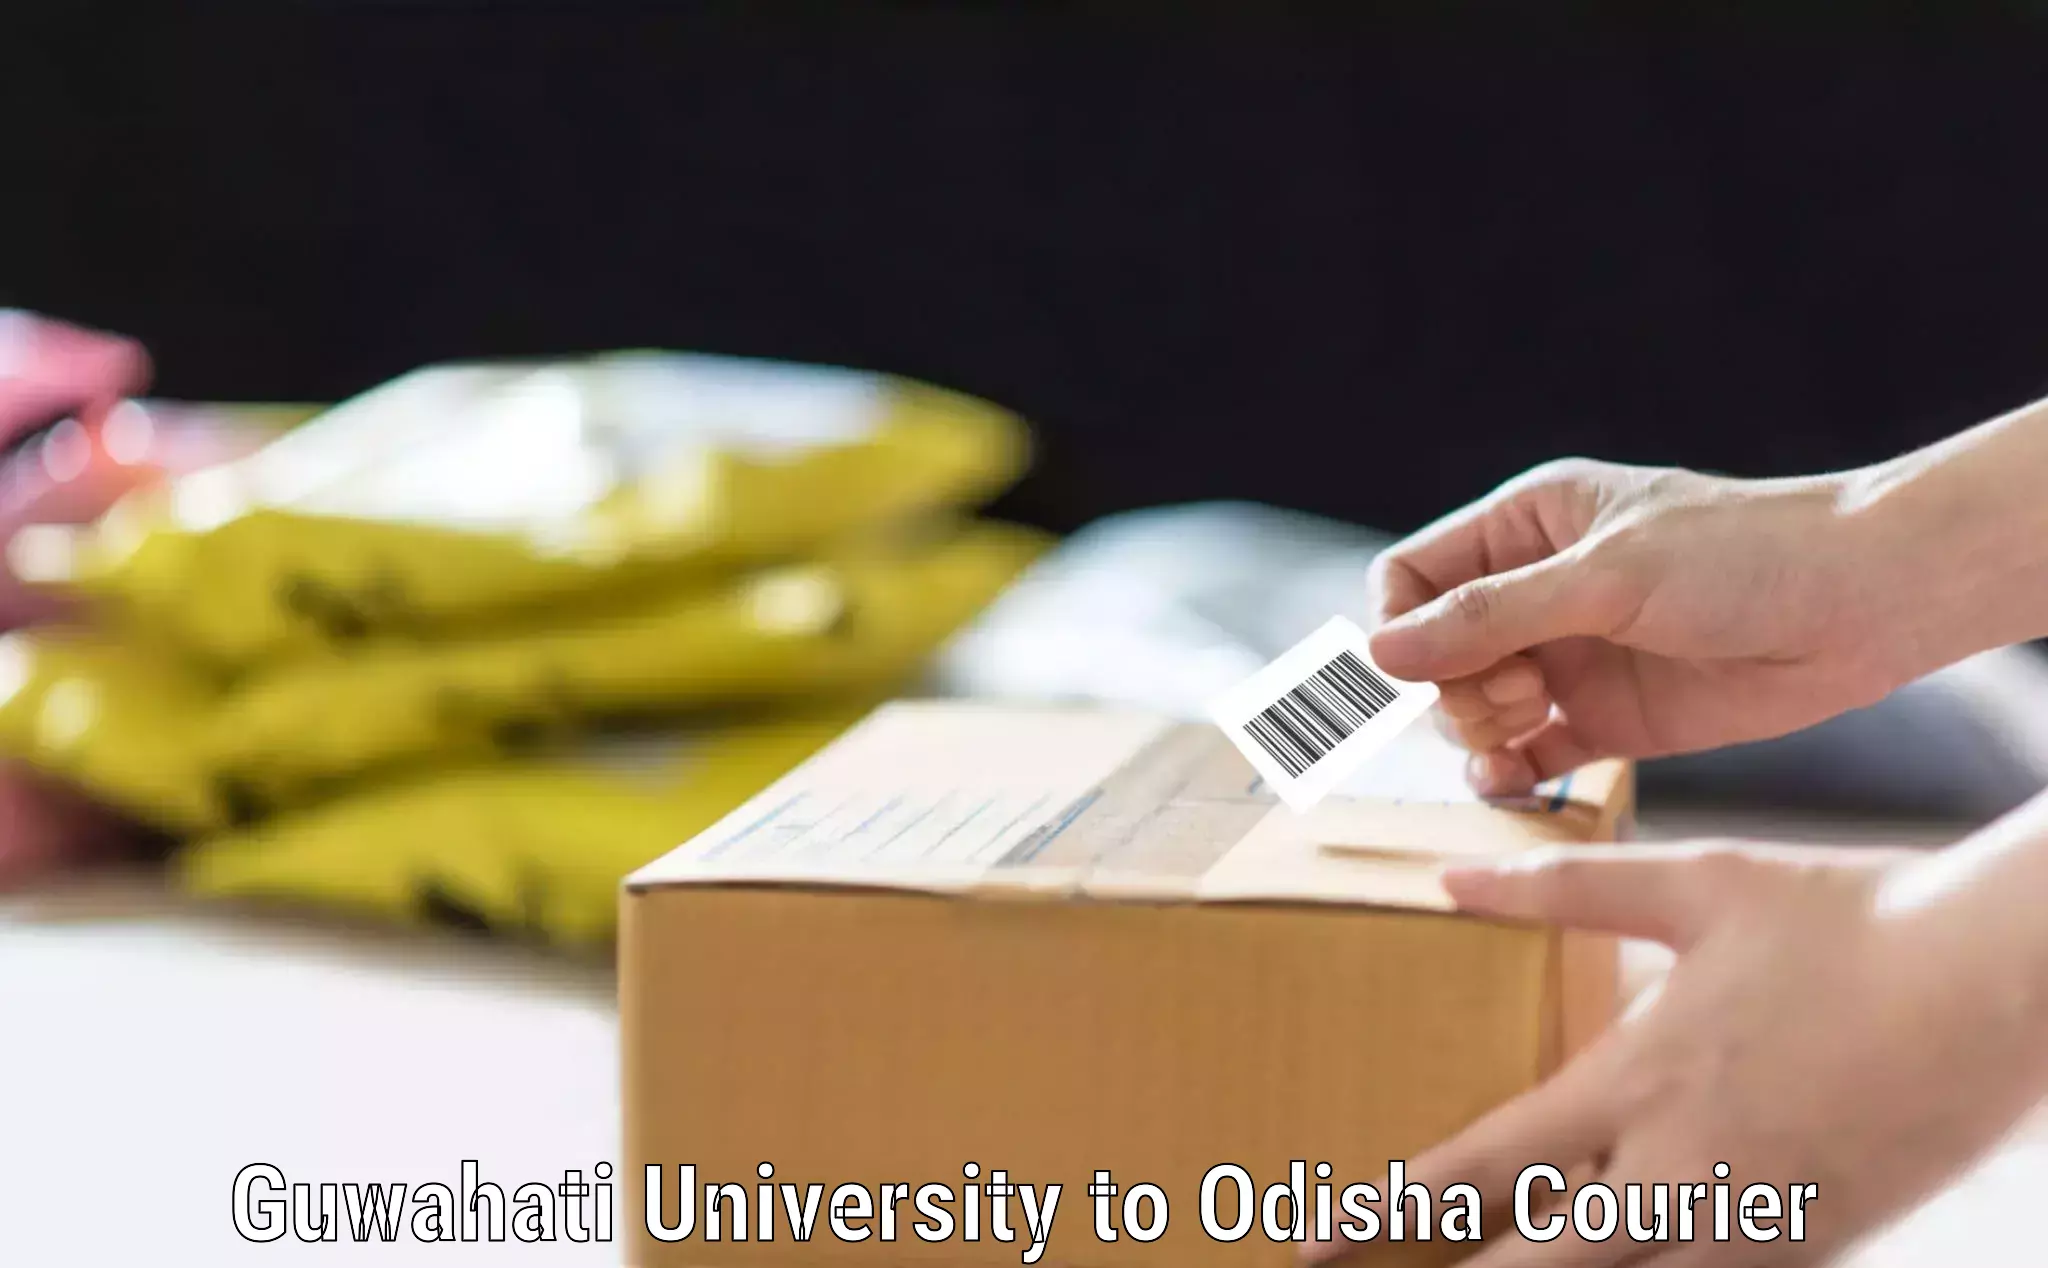 Efficient baggage courier system Guwahati University to Sohela